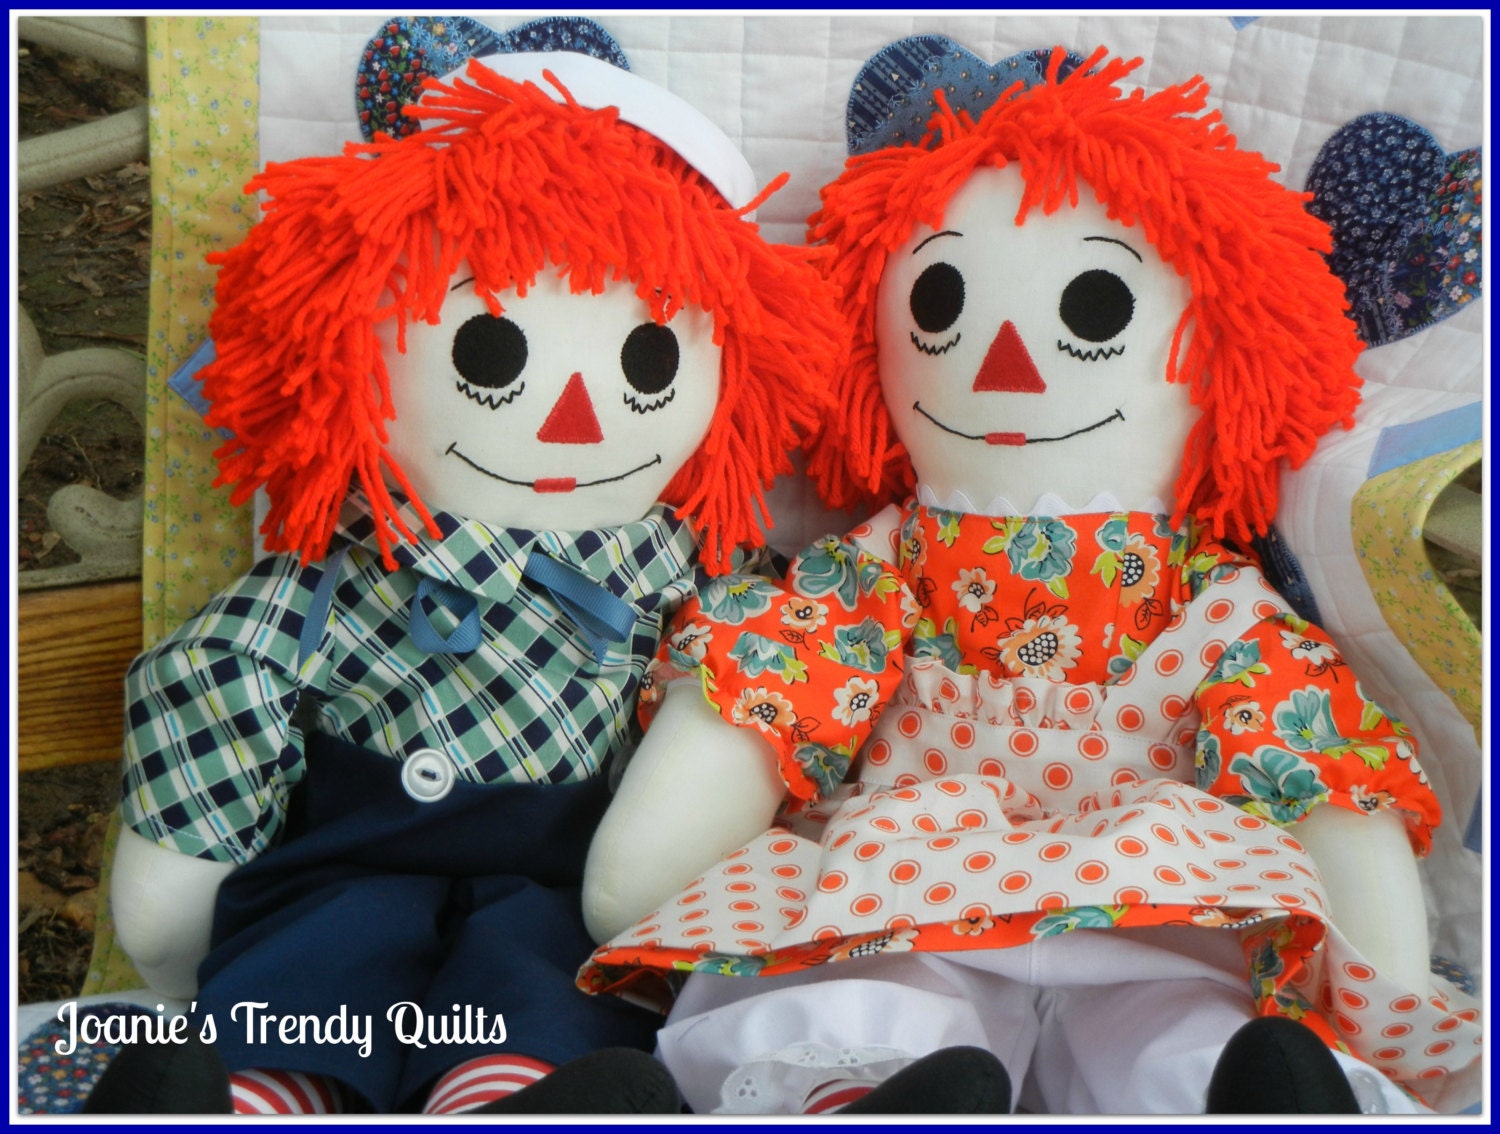 Raggedy Ann and Andy set. 25" in size. Clothing made with premium cotton fabric. Embroidered heart with "I Love You."